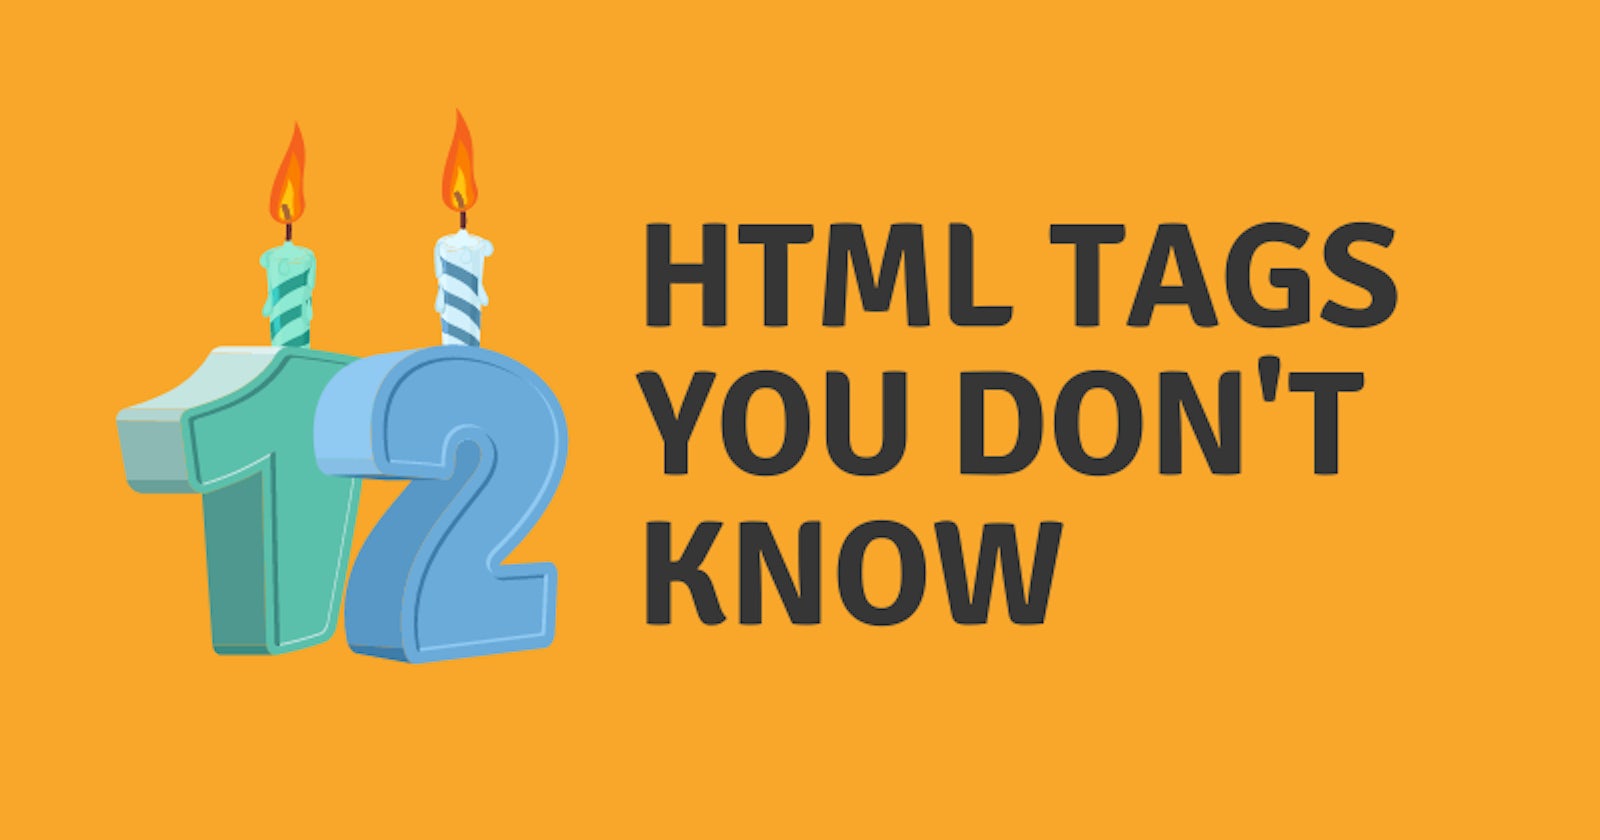 12 HTML Tags You Don't Know